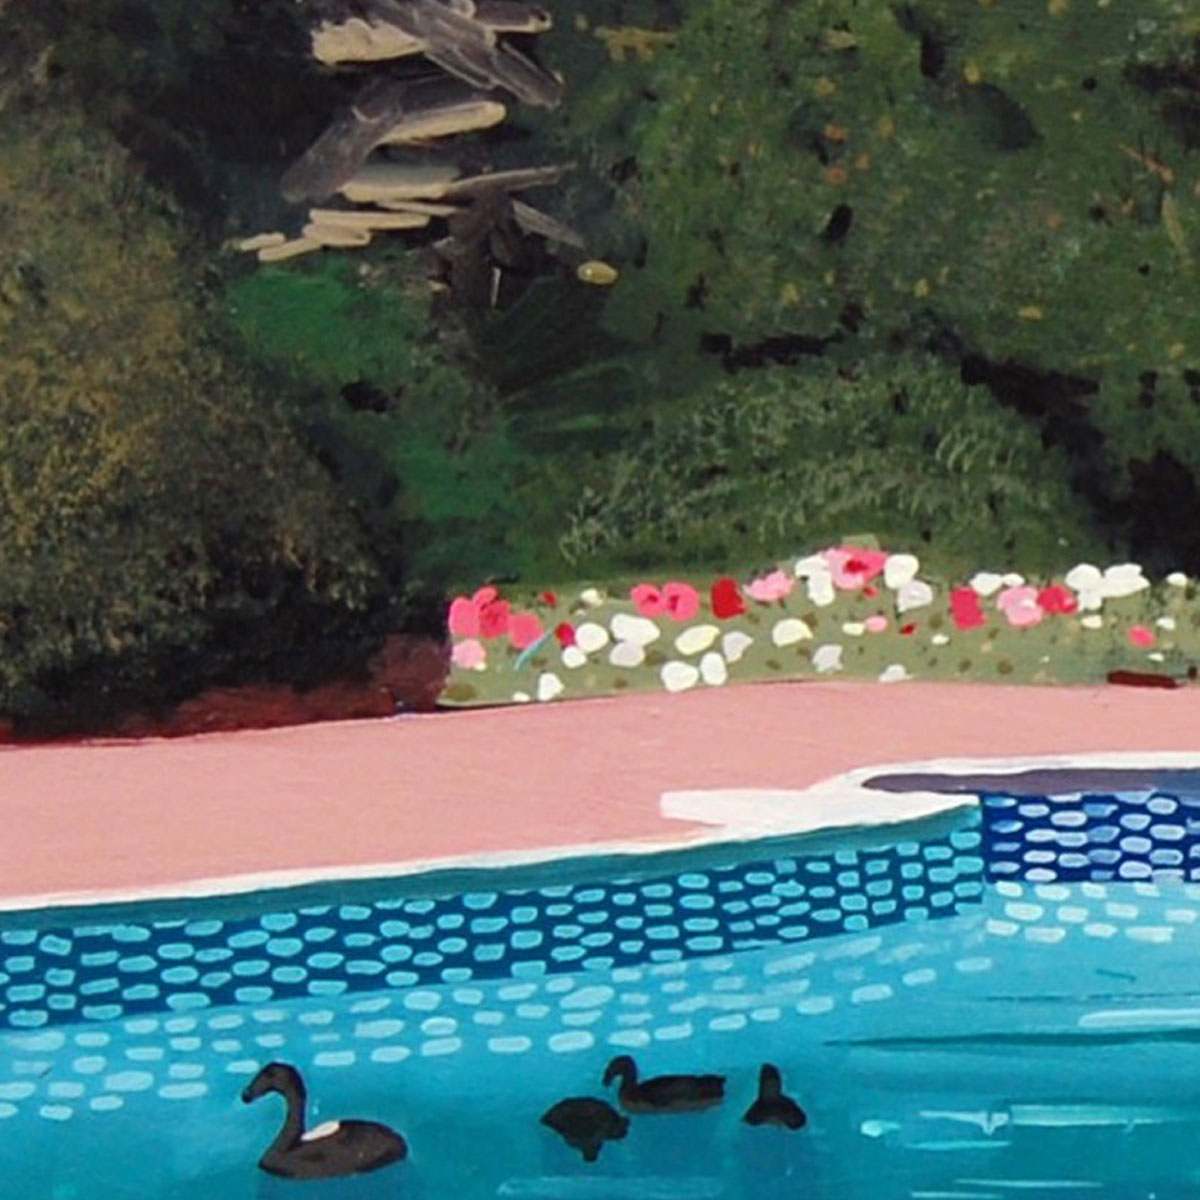 Back view of a man floating in a swimming pool watching a group of ducks swim by